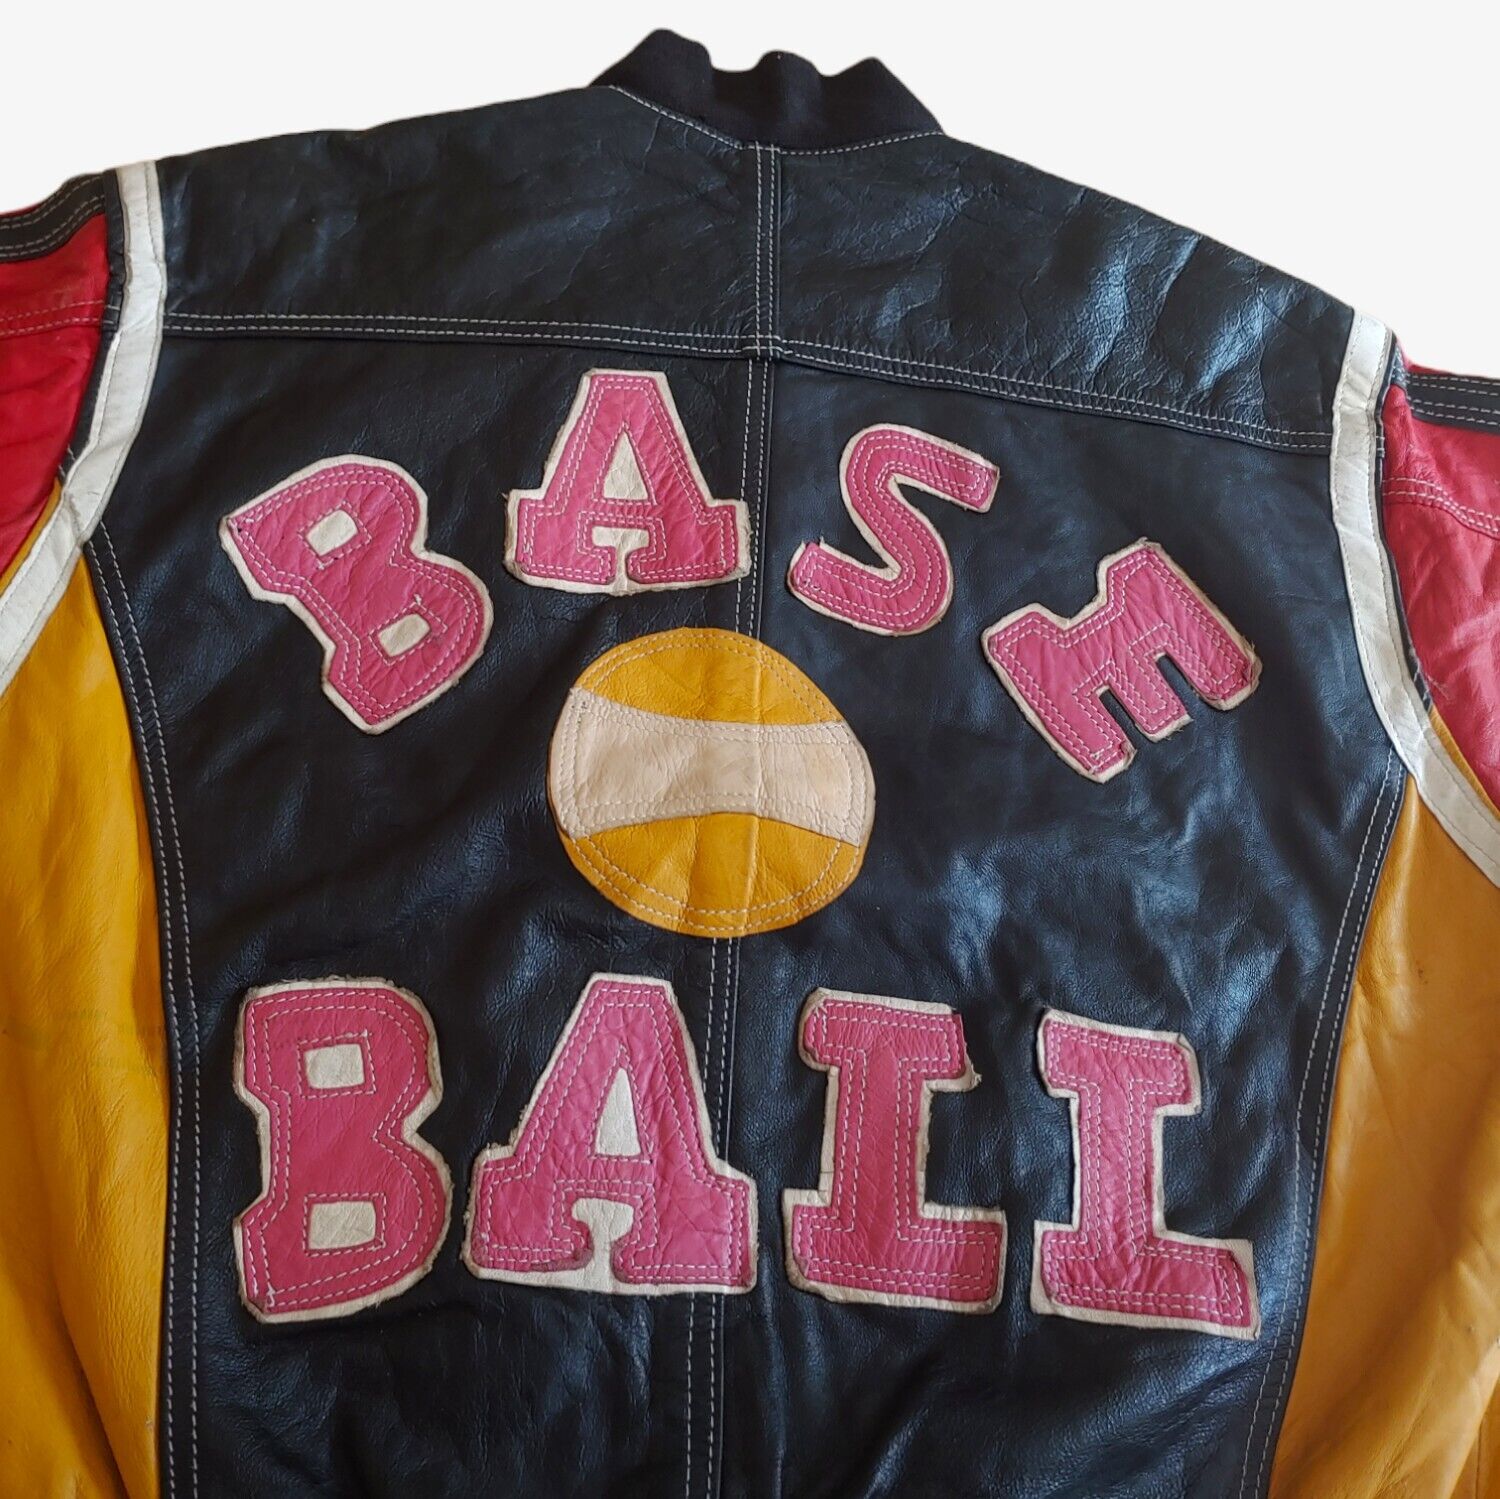 Vintage 90s Baseball Embroidered Spell Out Colourful Leather Varsity Jacket With Big Back Motif Logo - Casspios Dream